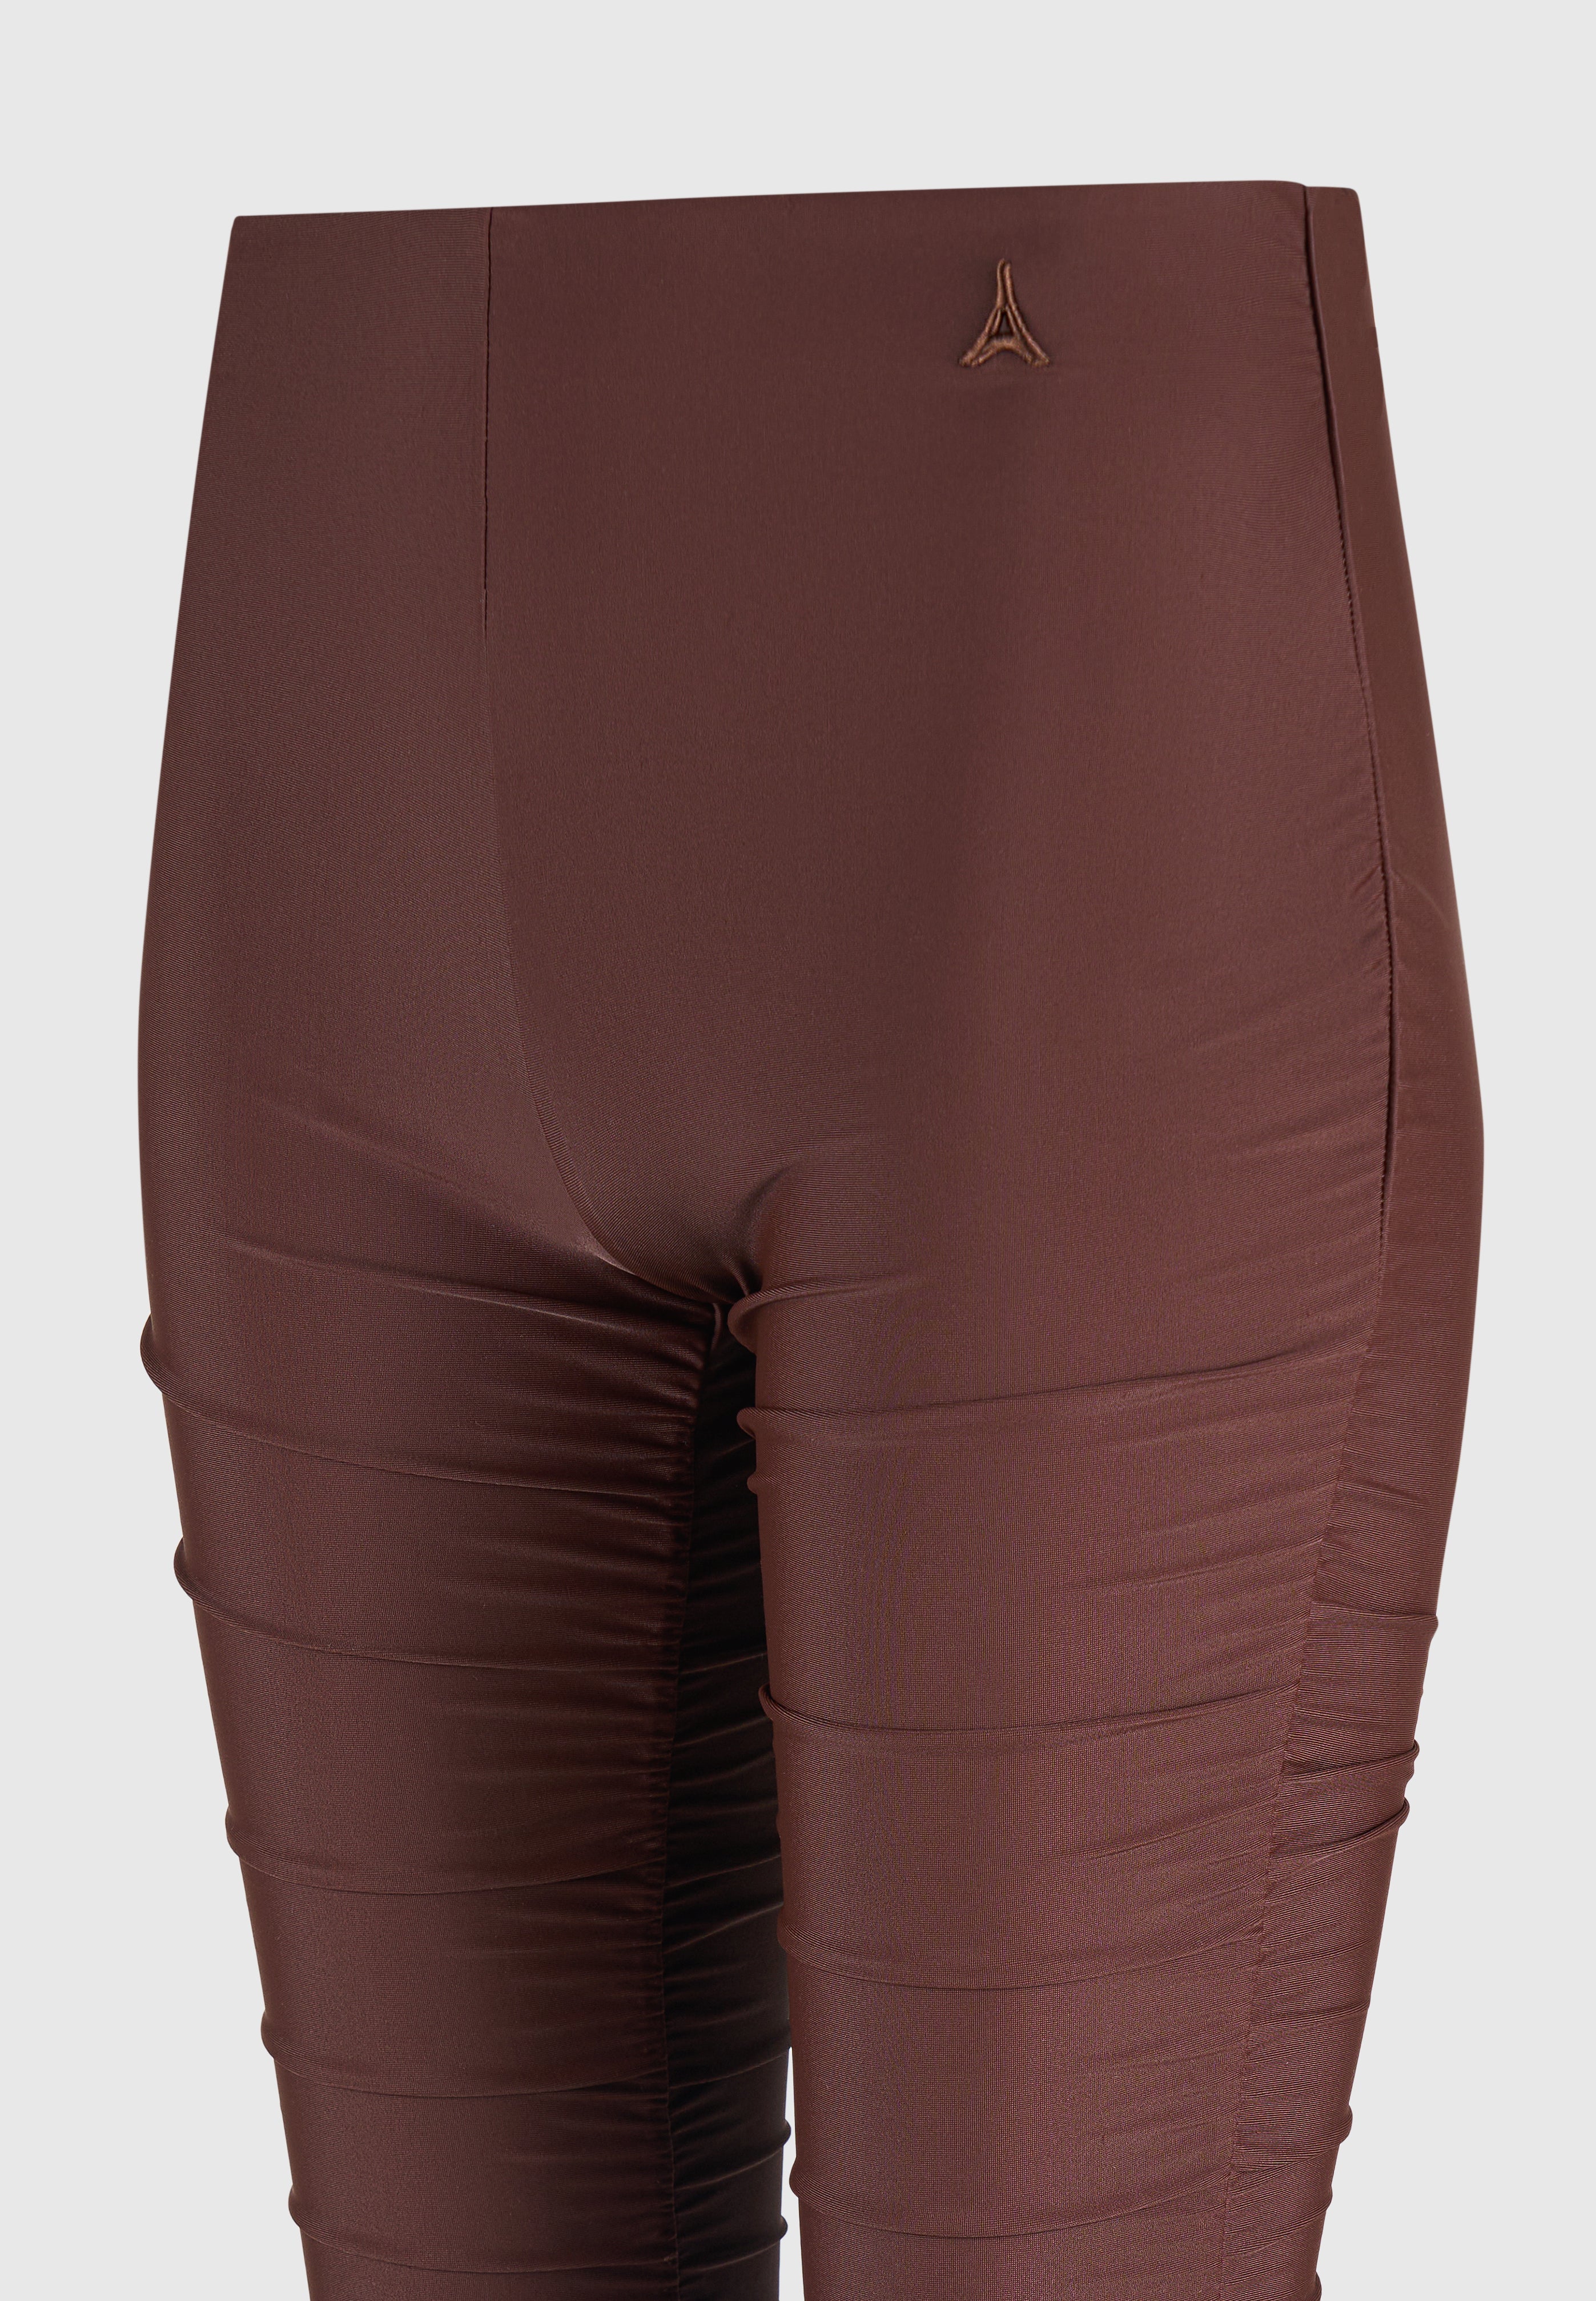 ruched-fit-and-flare-leggings-brown